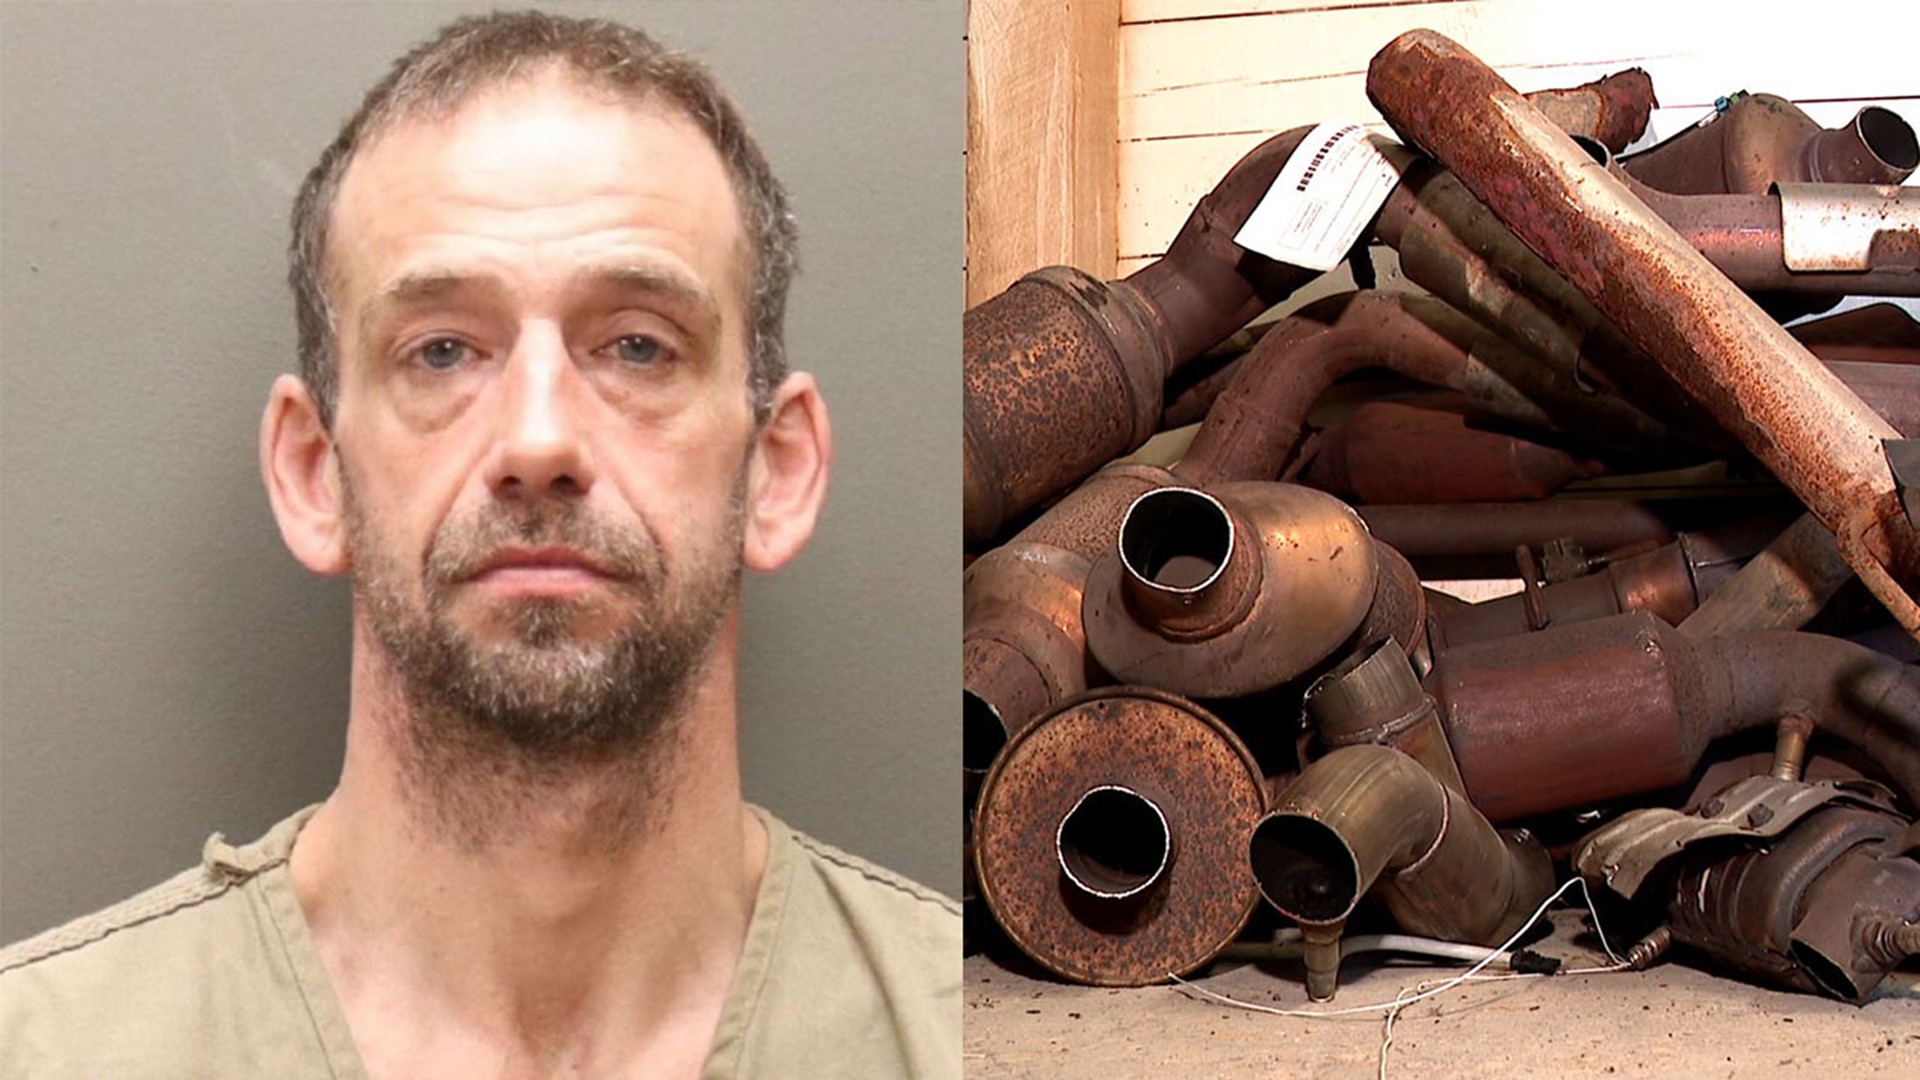 During a nine-month investigation, central Ohio law enforcement built a case that led to one of the largest takedowns of an alleged catalytic converter thief.